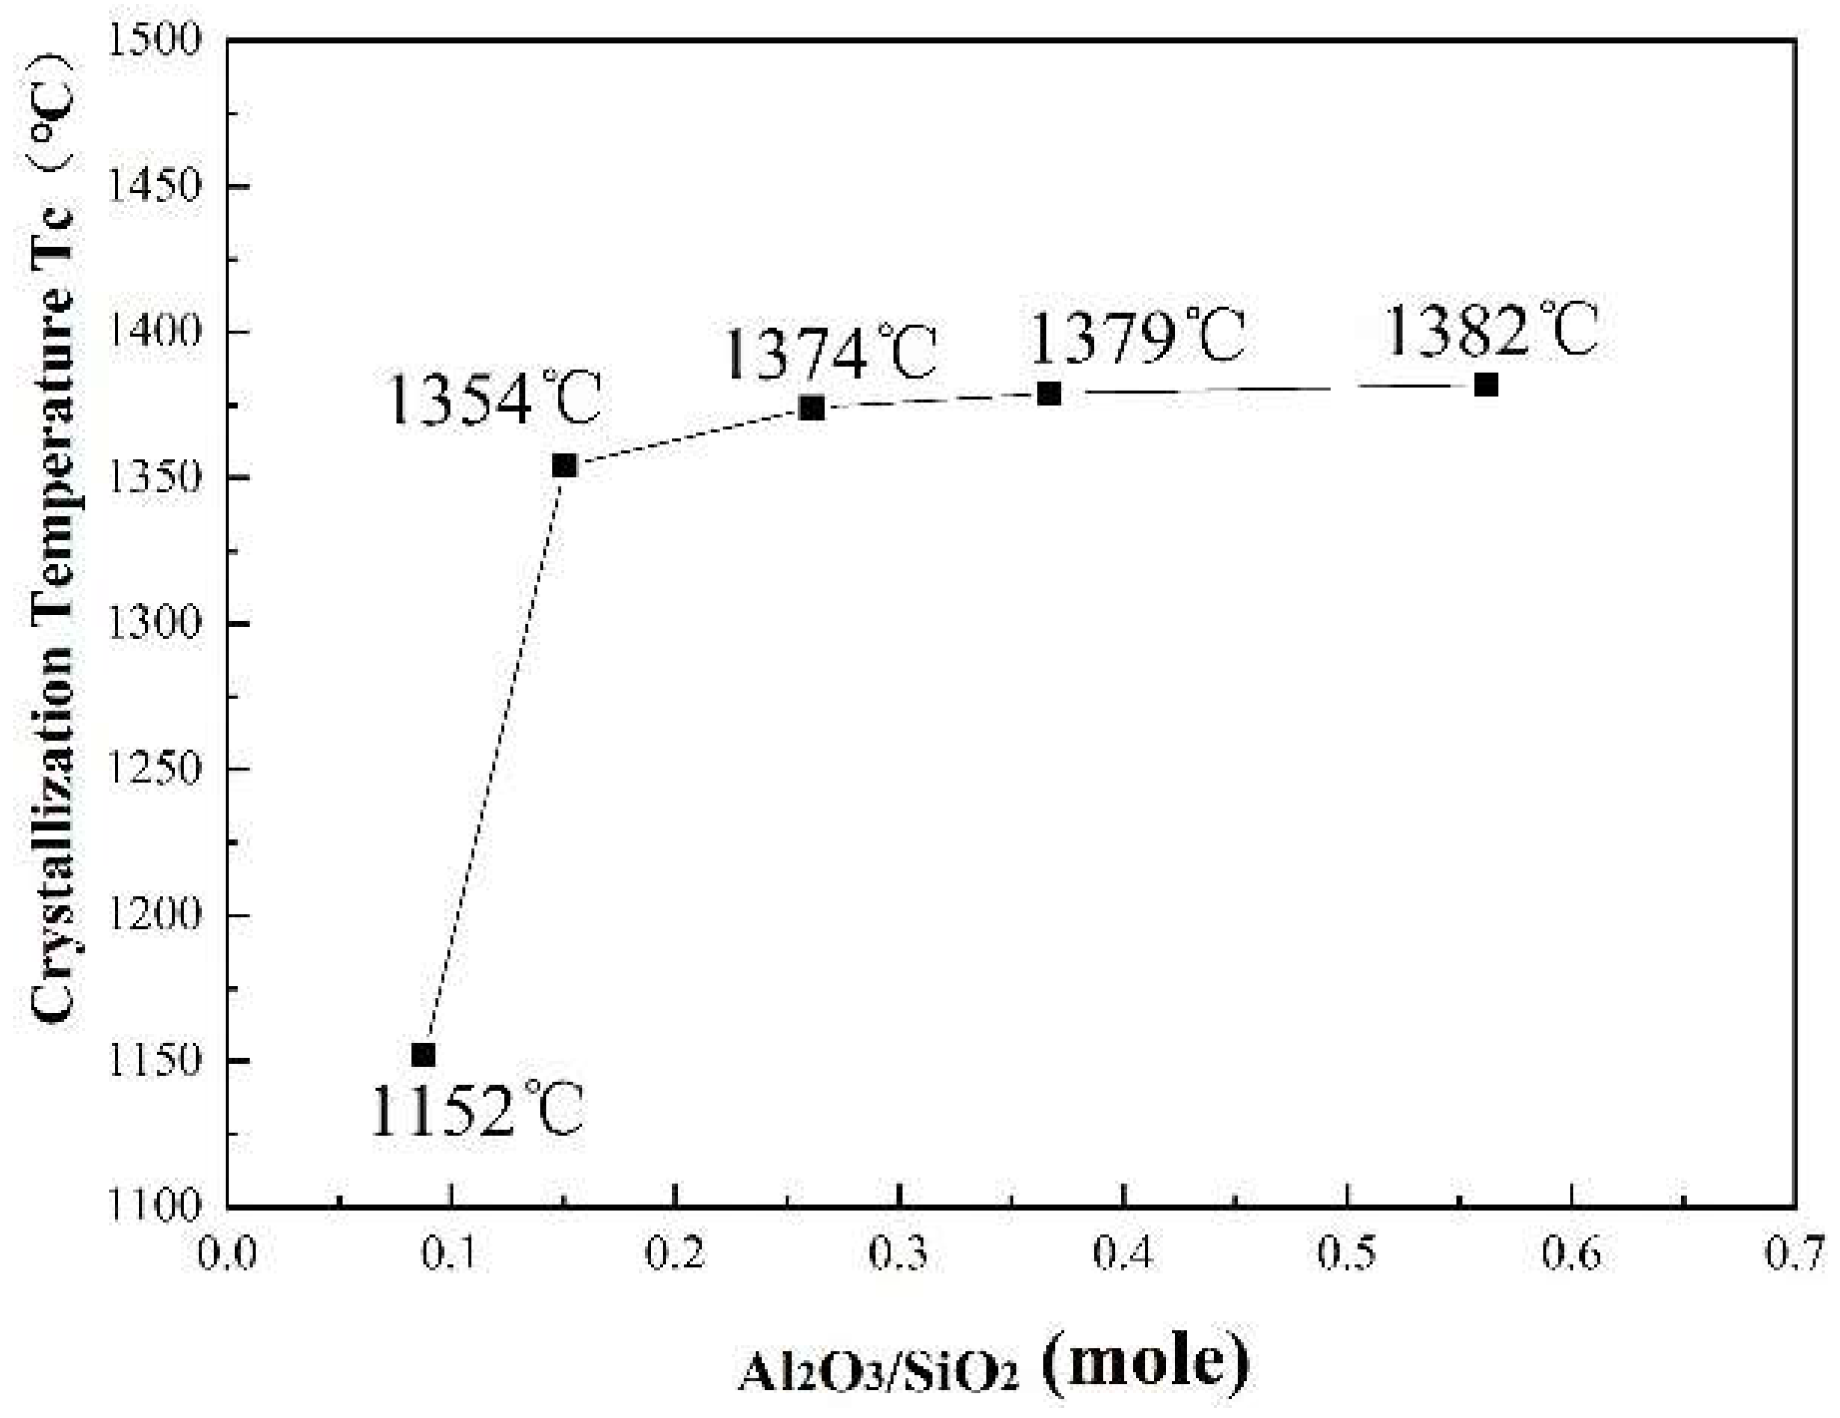 Materials | Free Full-Text | Crystallization Products and Structural  Characterization of CaO-SiO2-Based Mold Fluxes with Varying Al2O3/SiO2  Ratios | HTML